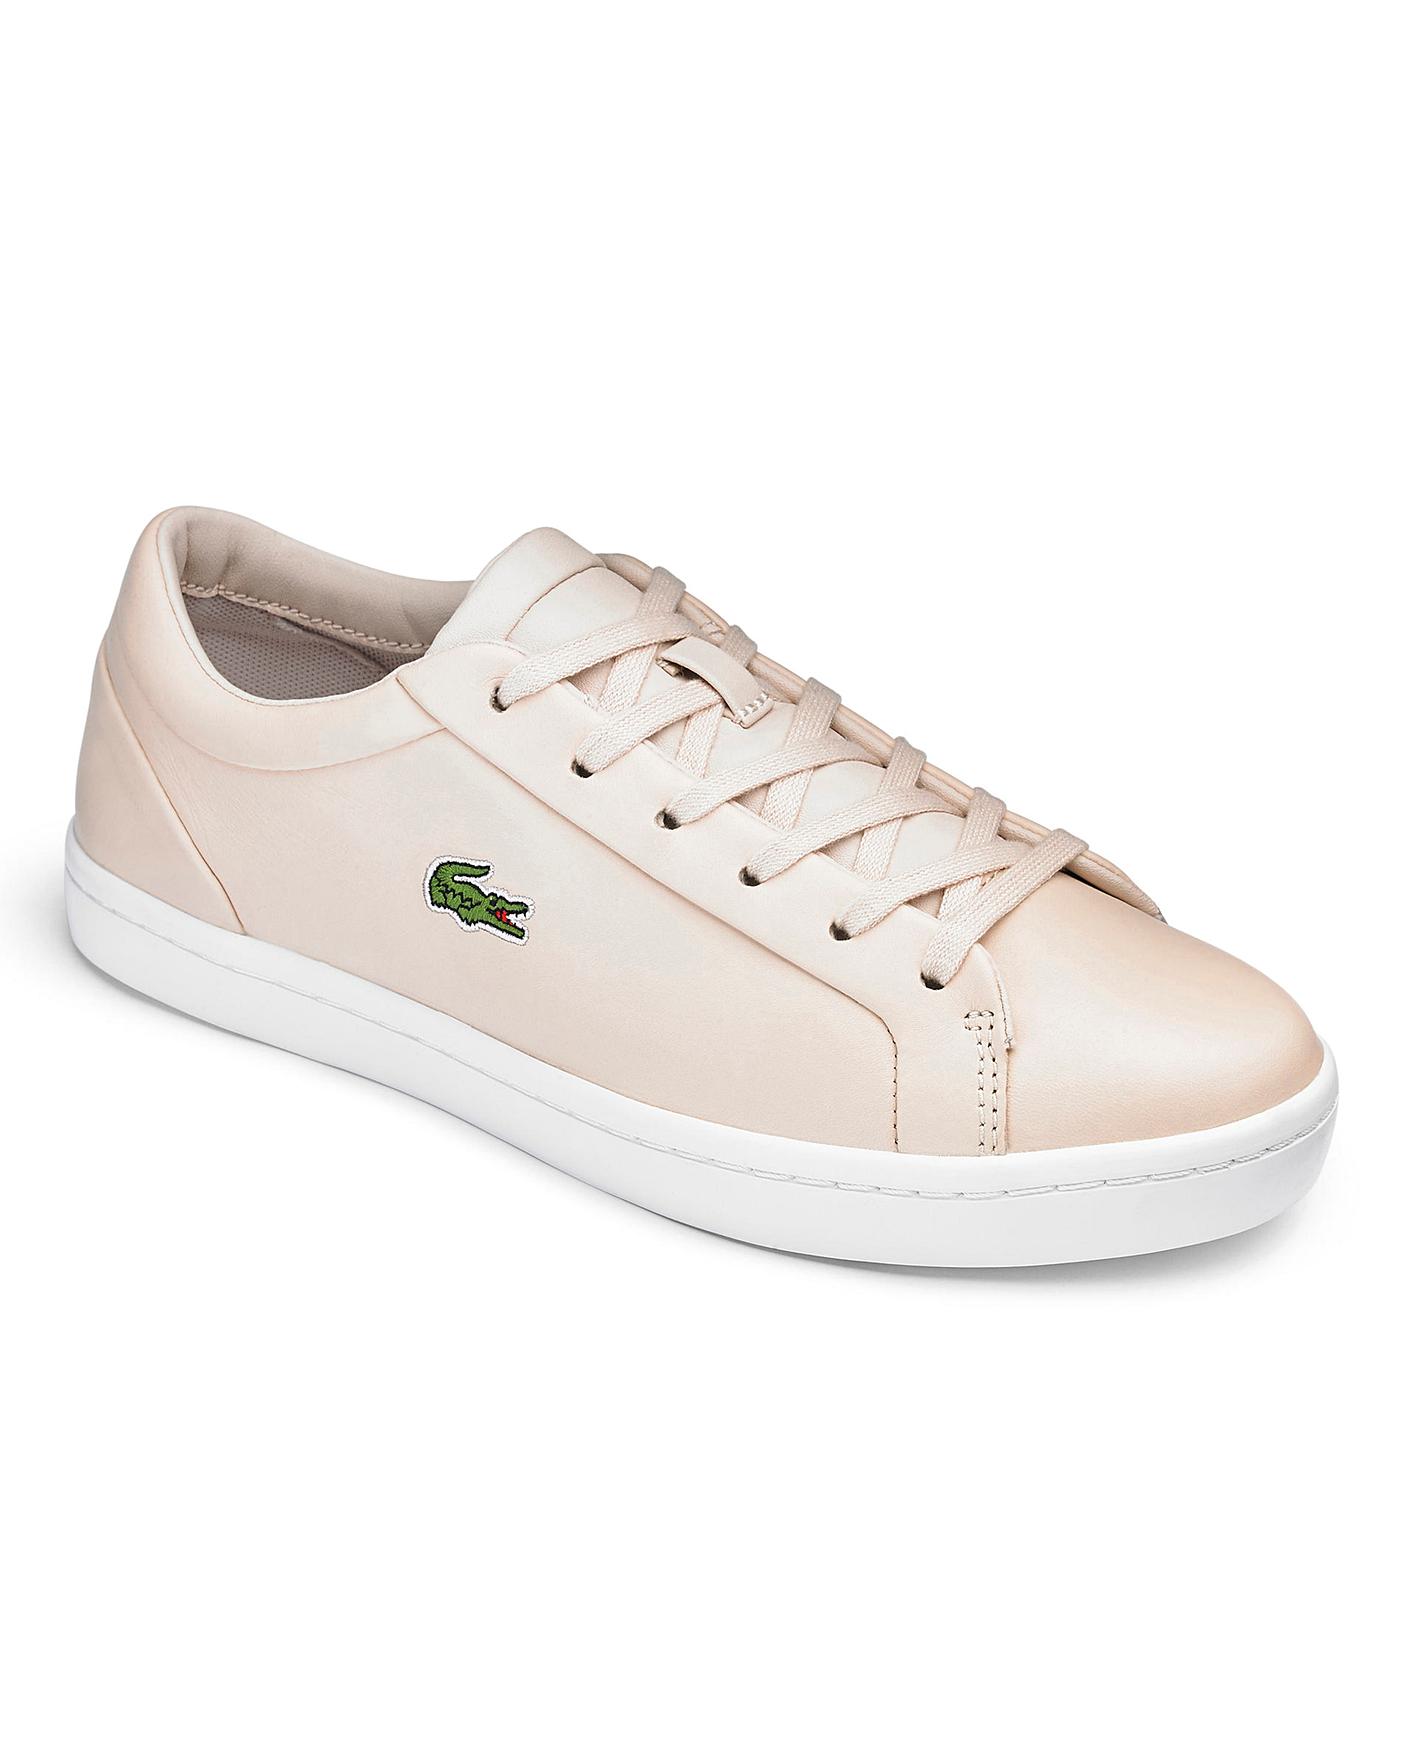 Lacoste Straightset Womens Trainers 